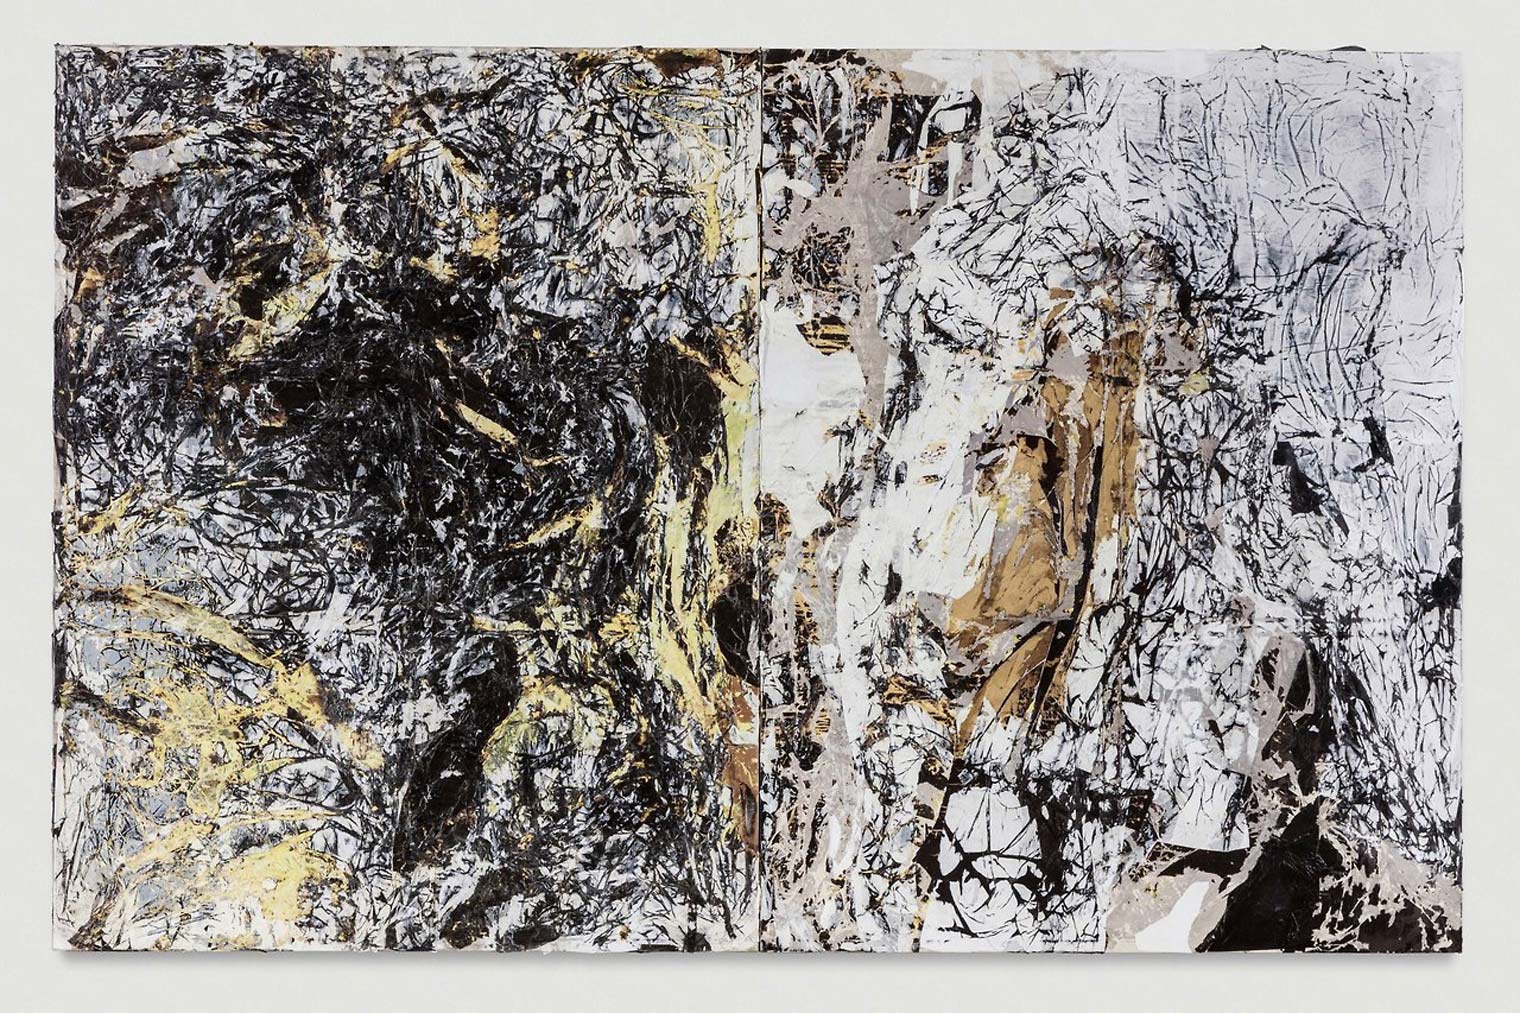 An abstract painting by Mark Bradford composed primarily of blacks, whites, and yellows